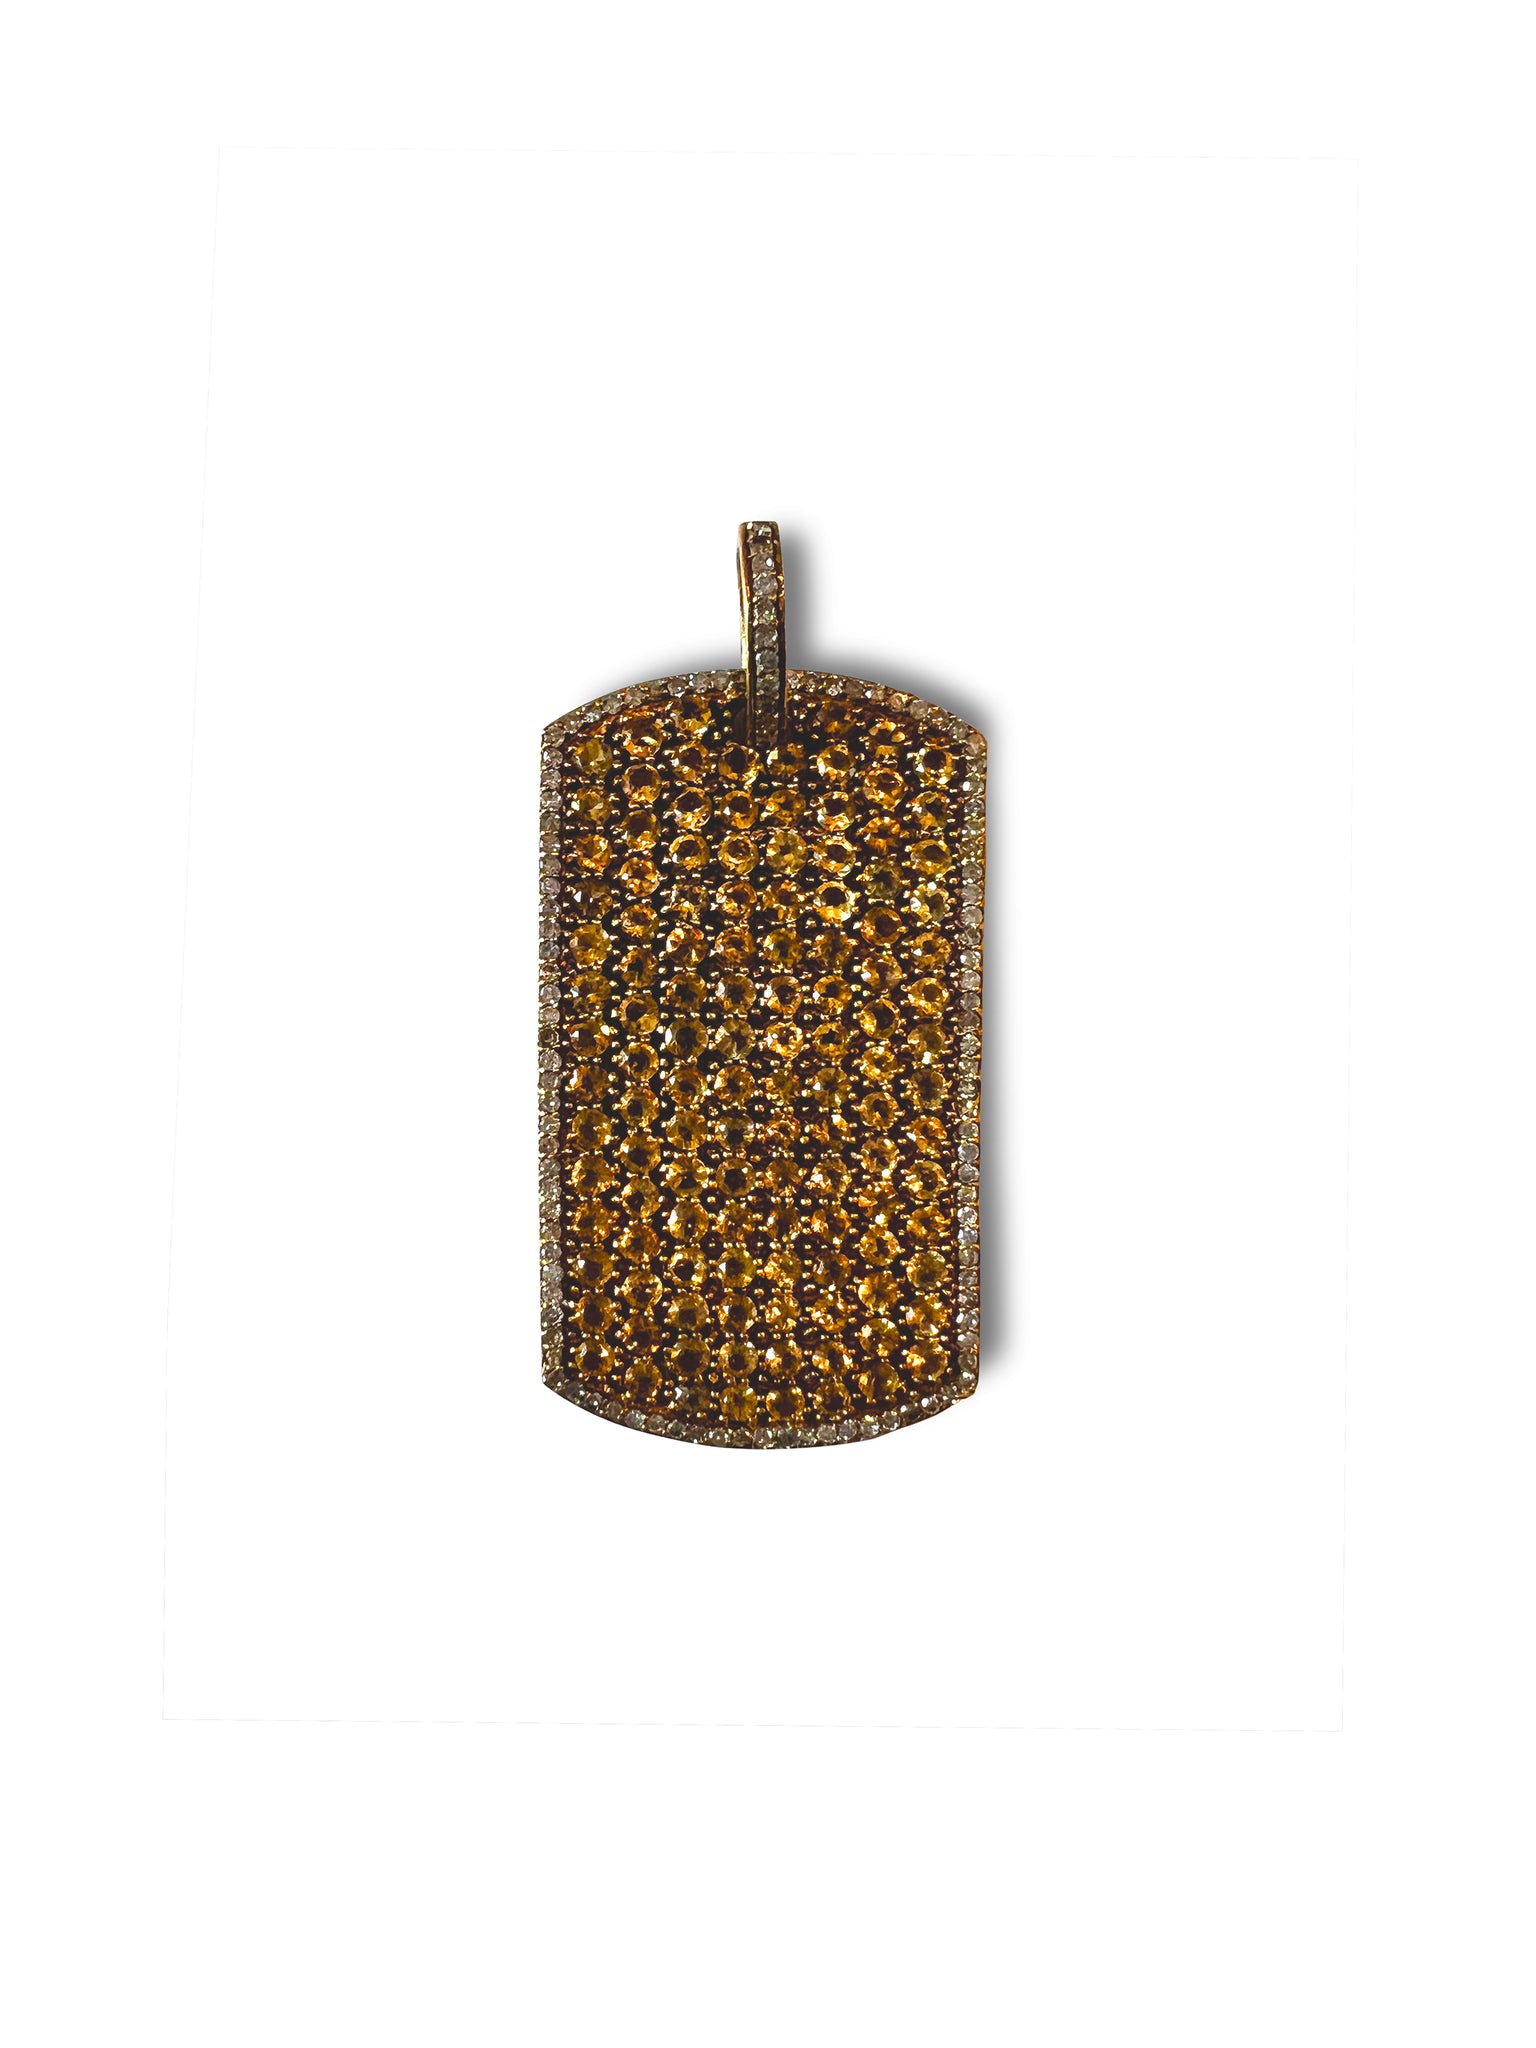 Diamond and Citrine Dog Tag set in 22kt Gold covered Brass